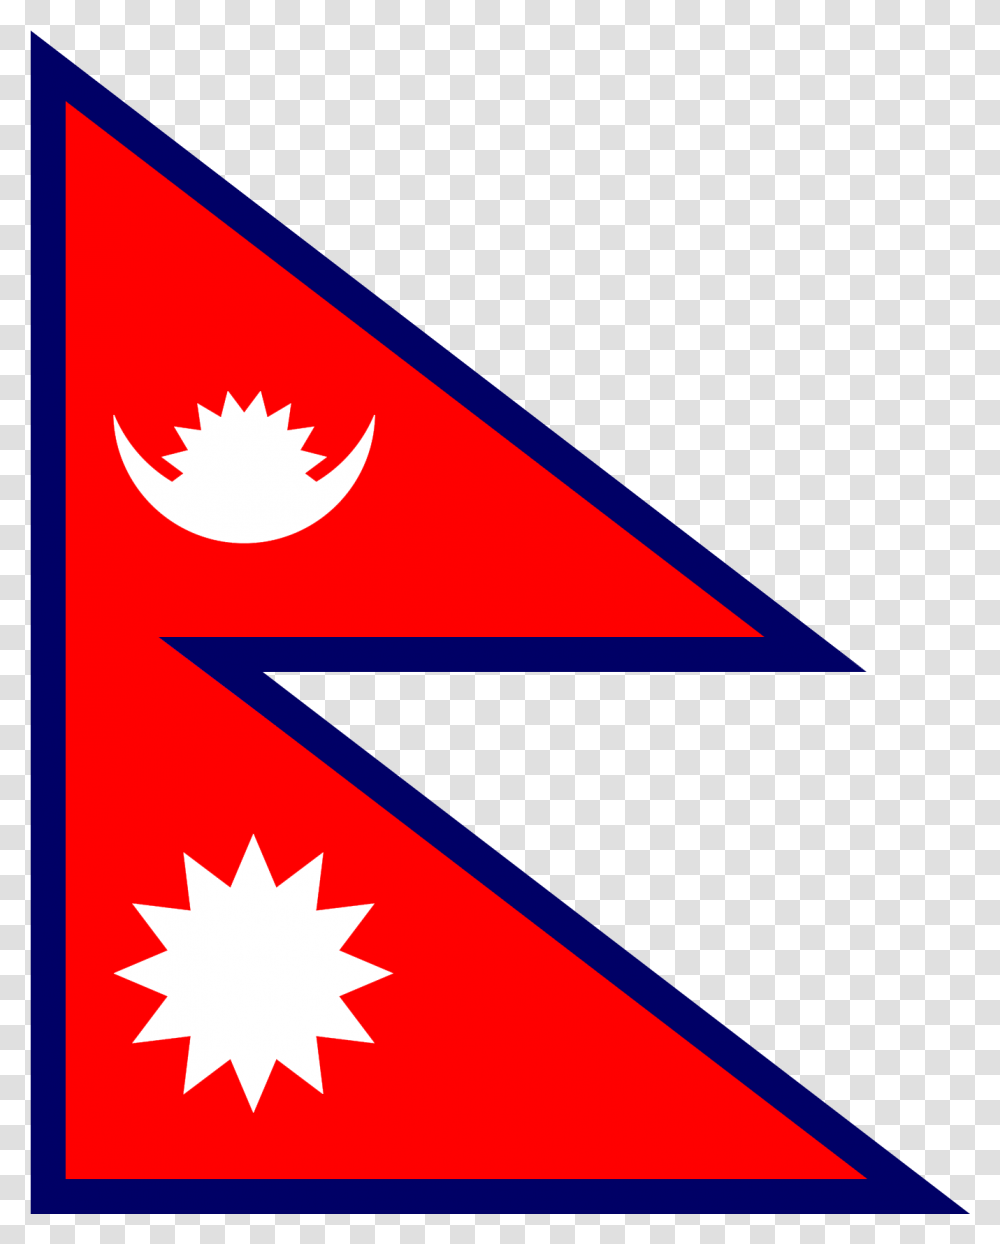 Nepali Flag Clipart Download No Independence Day Country, Triangle, Star Symbol, Leaf Transparent Png